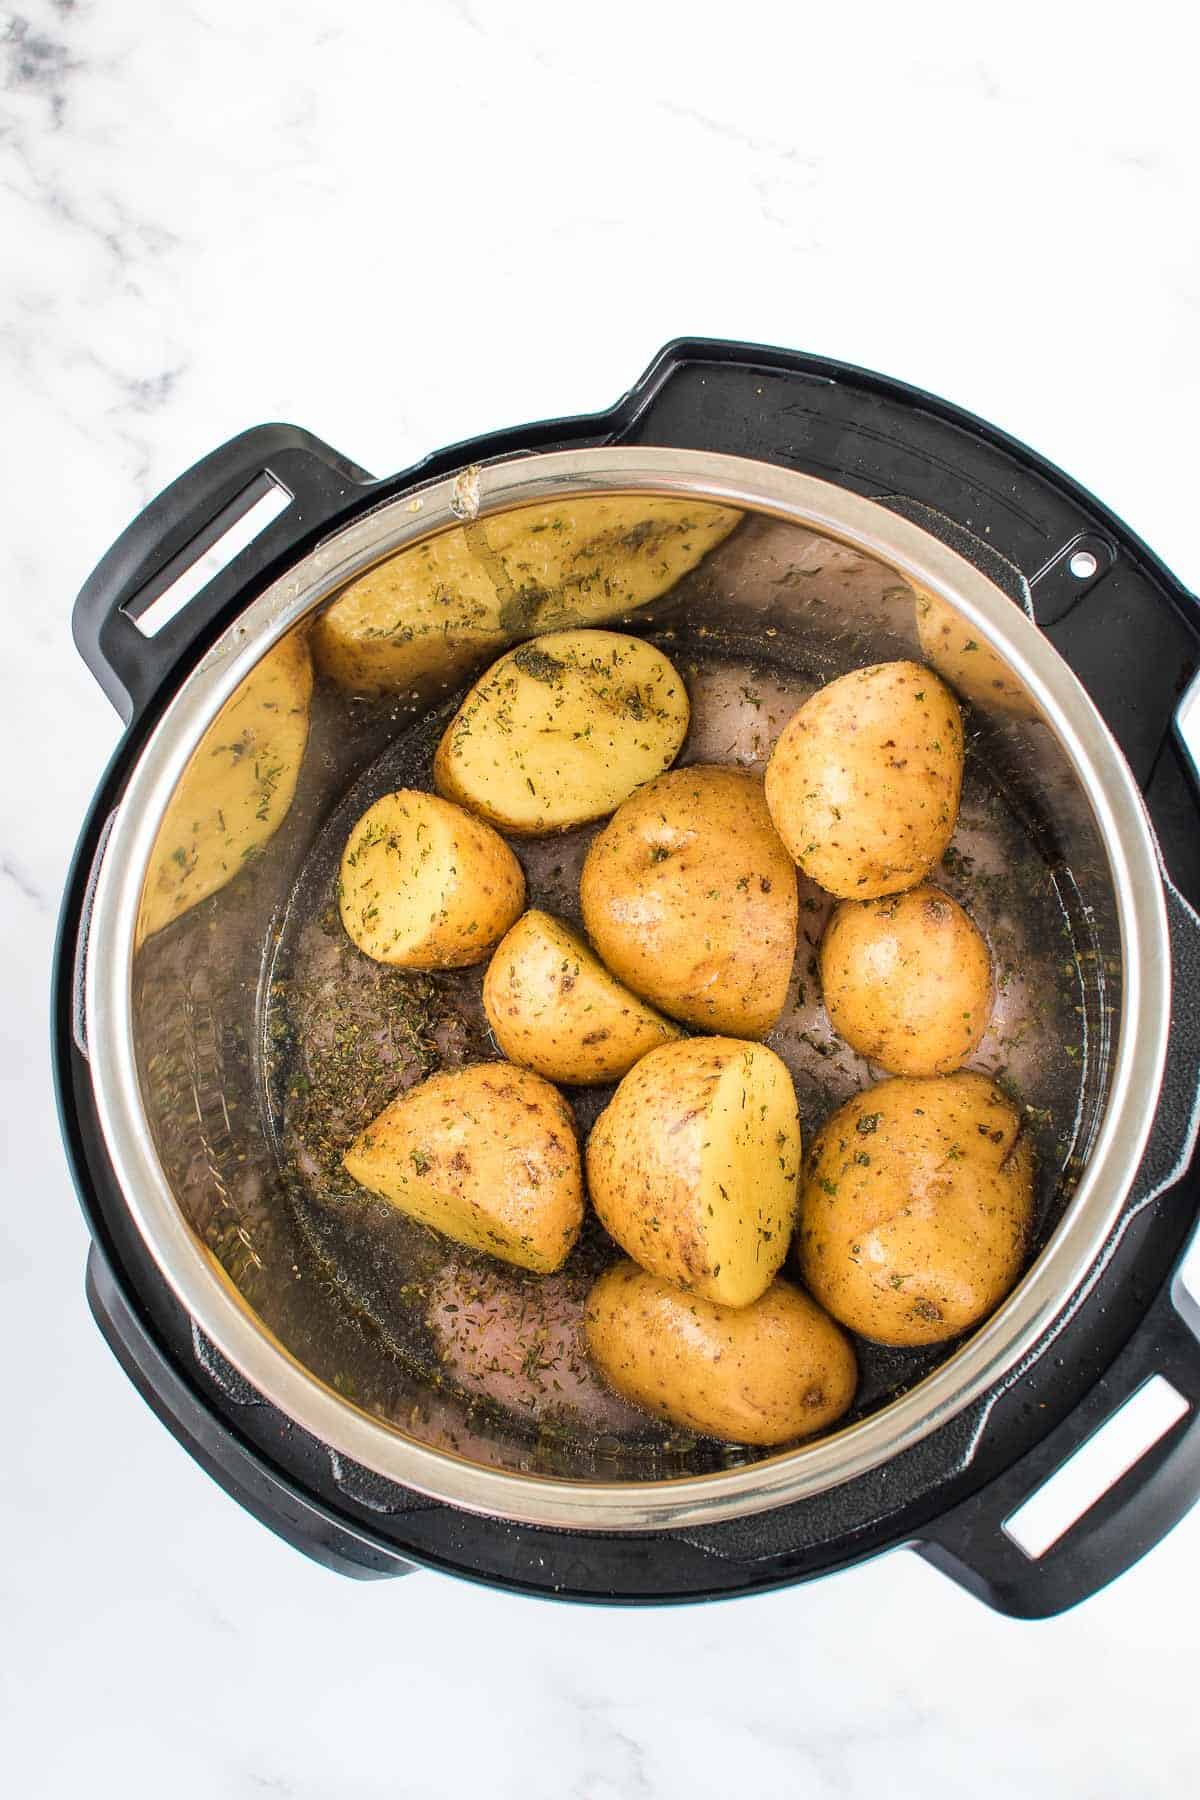 Chicken and potatoes in an instant pot.